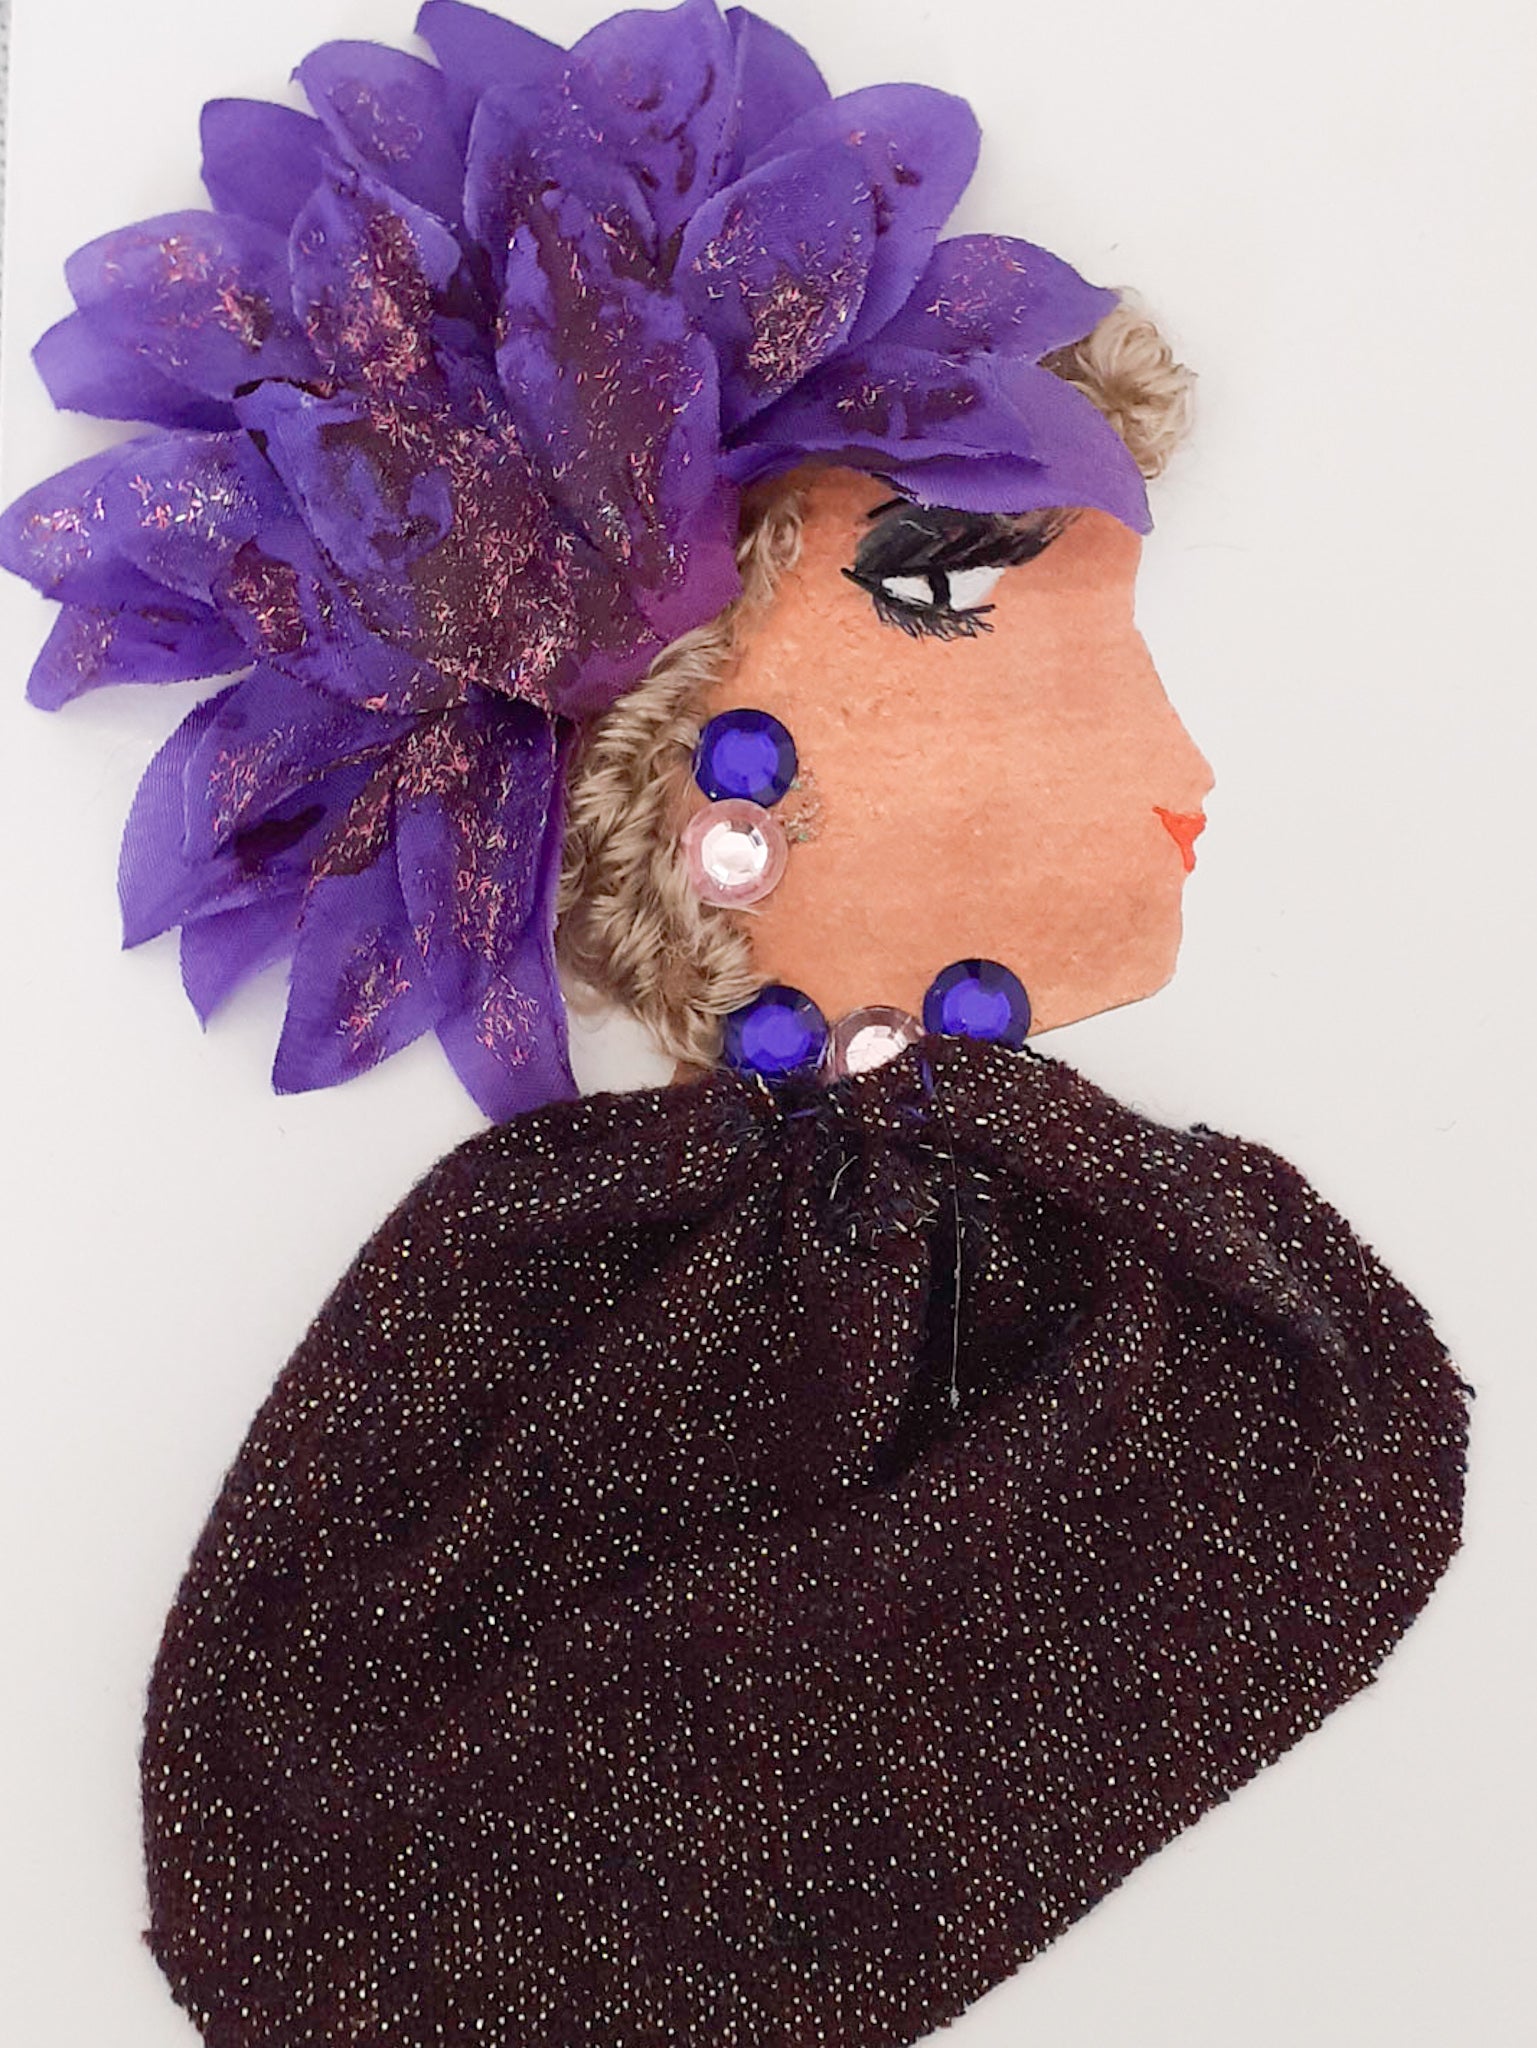 This card is called Valentina. She wears a purple sparkly blouse and a large purple flower in her blonde curly hair. 